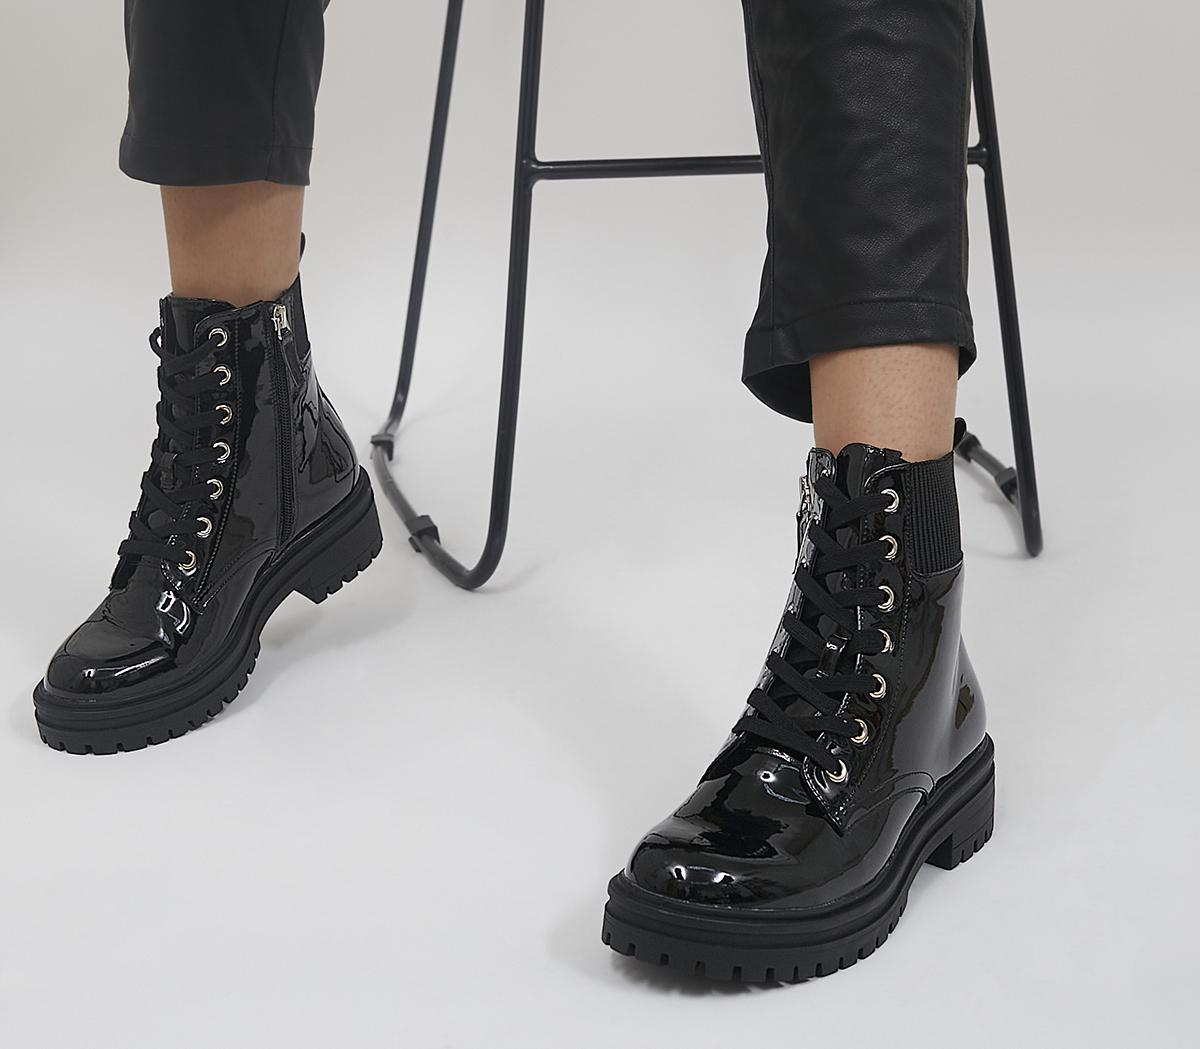 OfficeAmira Patent Ribbed Elastic Lace Up Ankle BootsBlack Patent